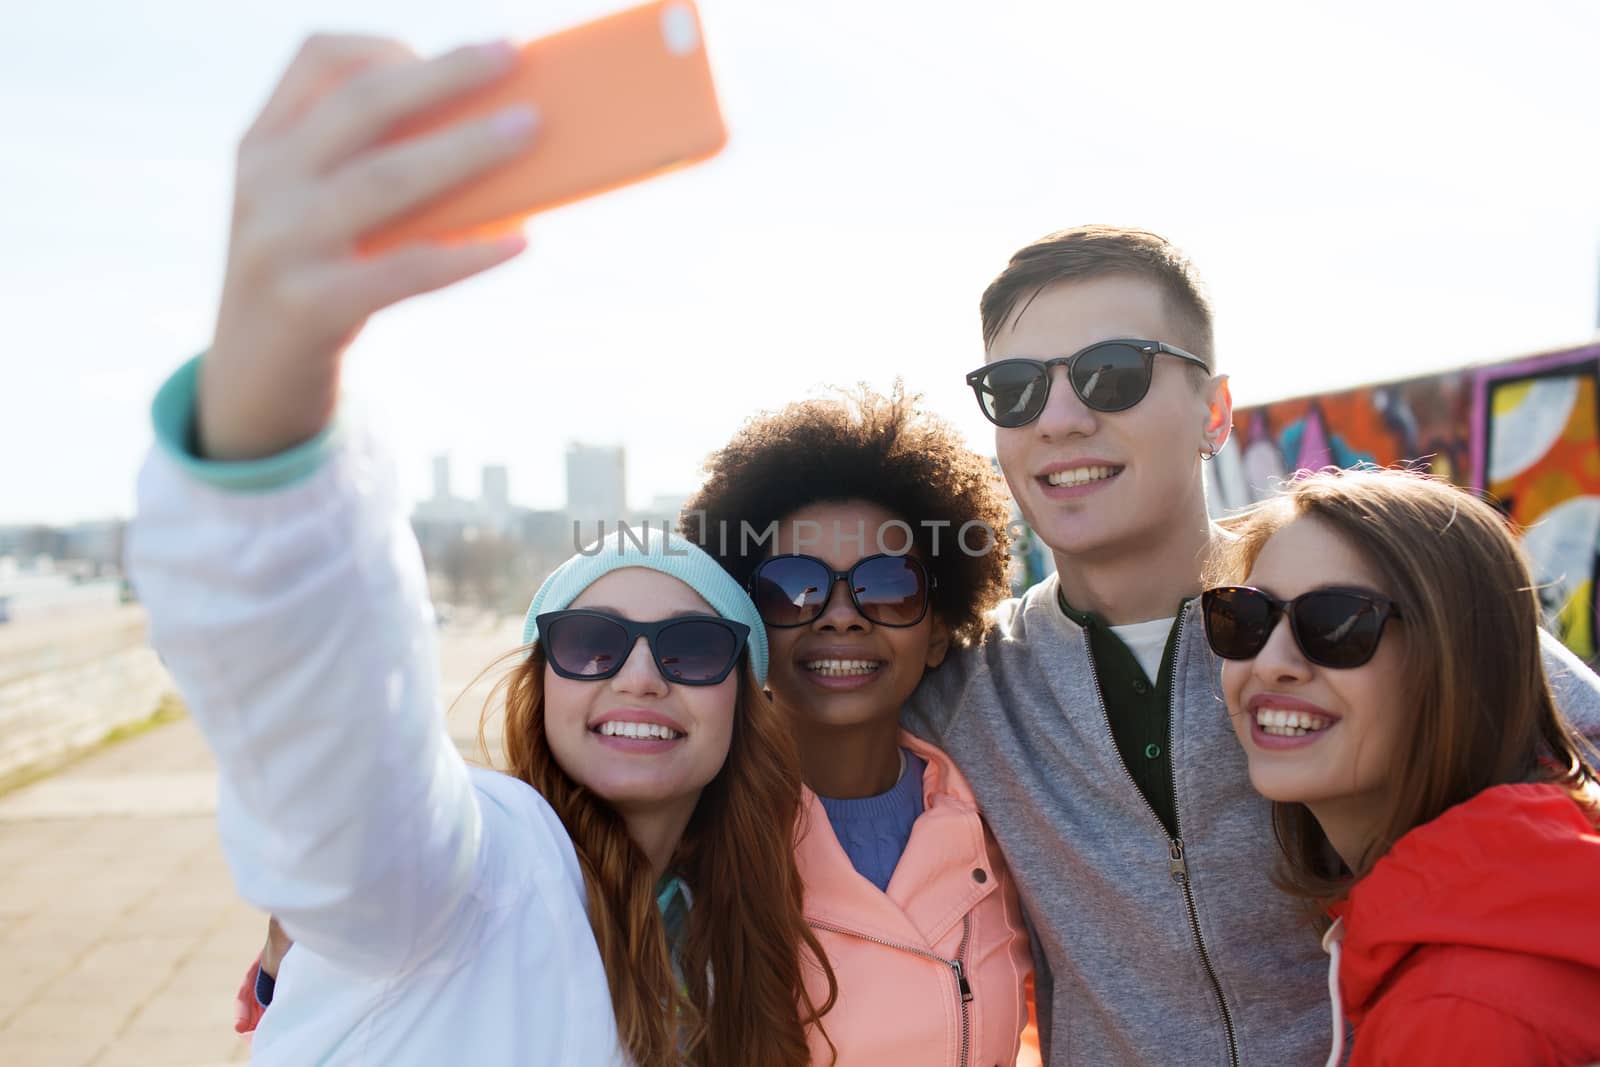 people, leisure, friendship and technology concept - group of smiling teenage friends taking selfie with smartphone outdoors